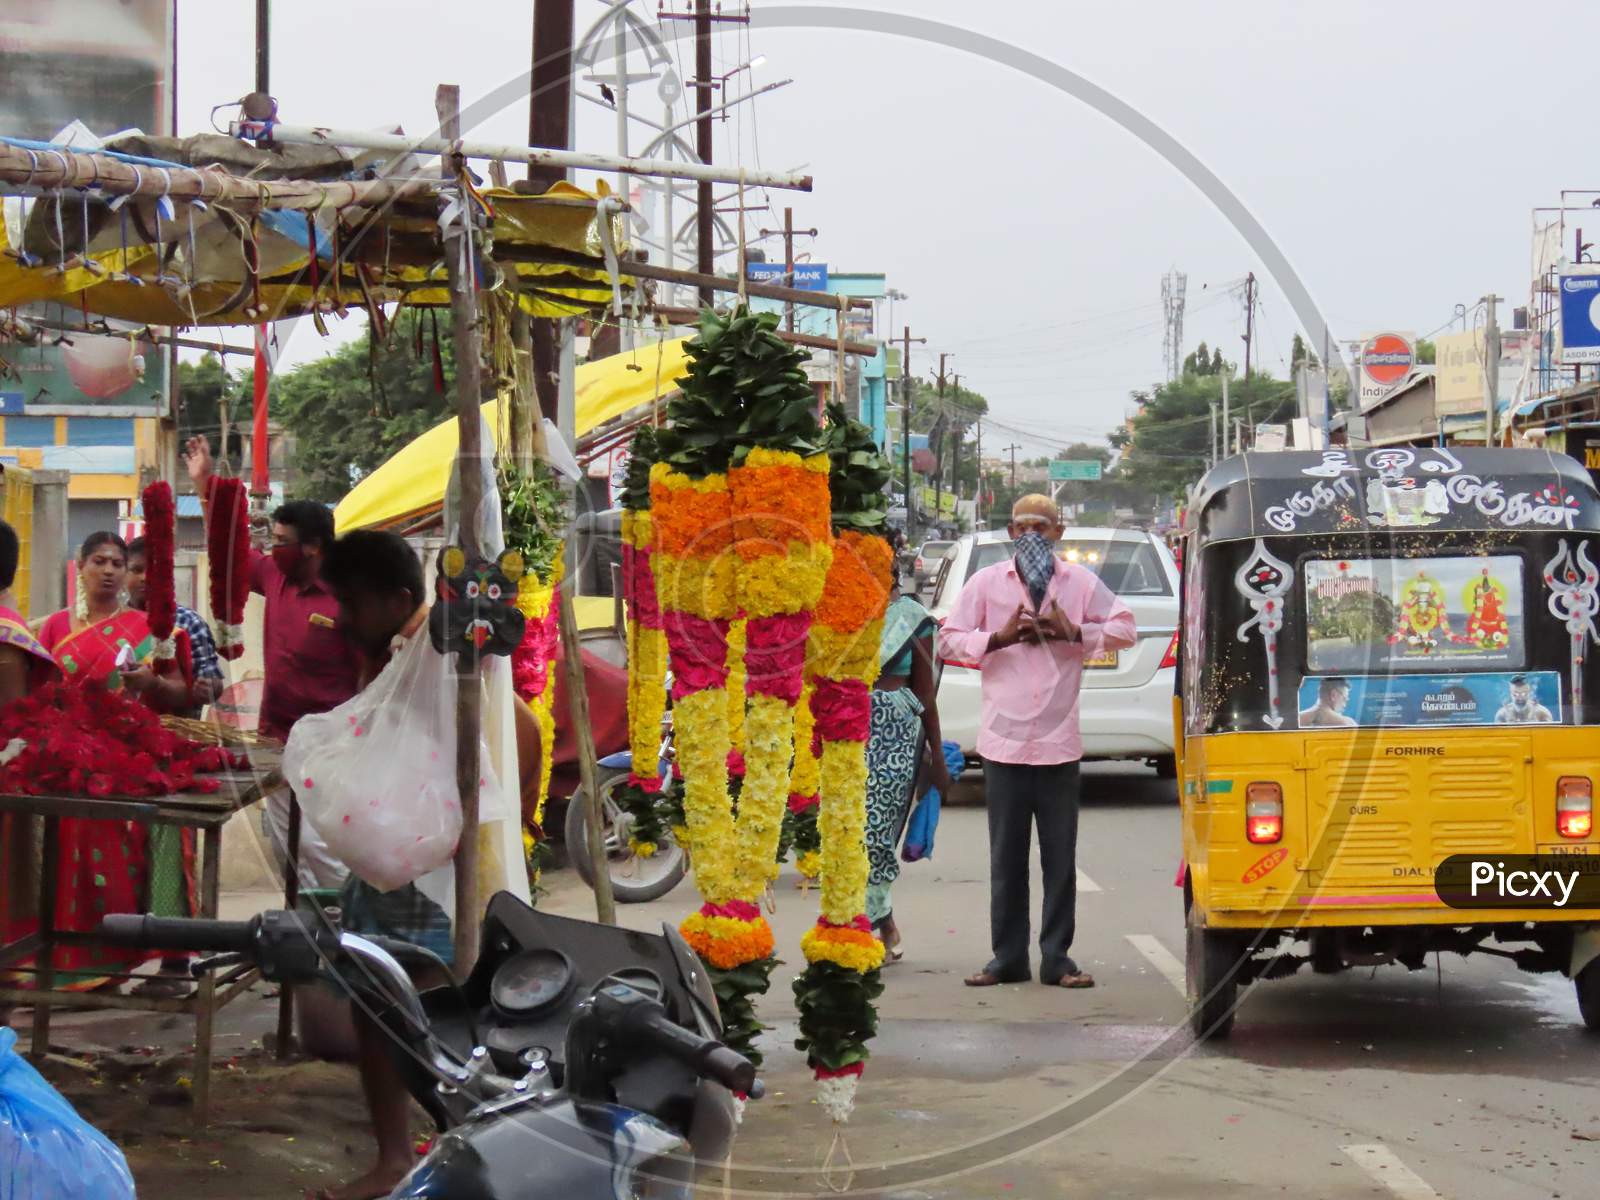 On The Road In The Morning, A Businessman Selling Flower Garlands Near The Temple Was Transacted Near The Shop And The Traditional Artwork On Vehicle